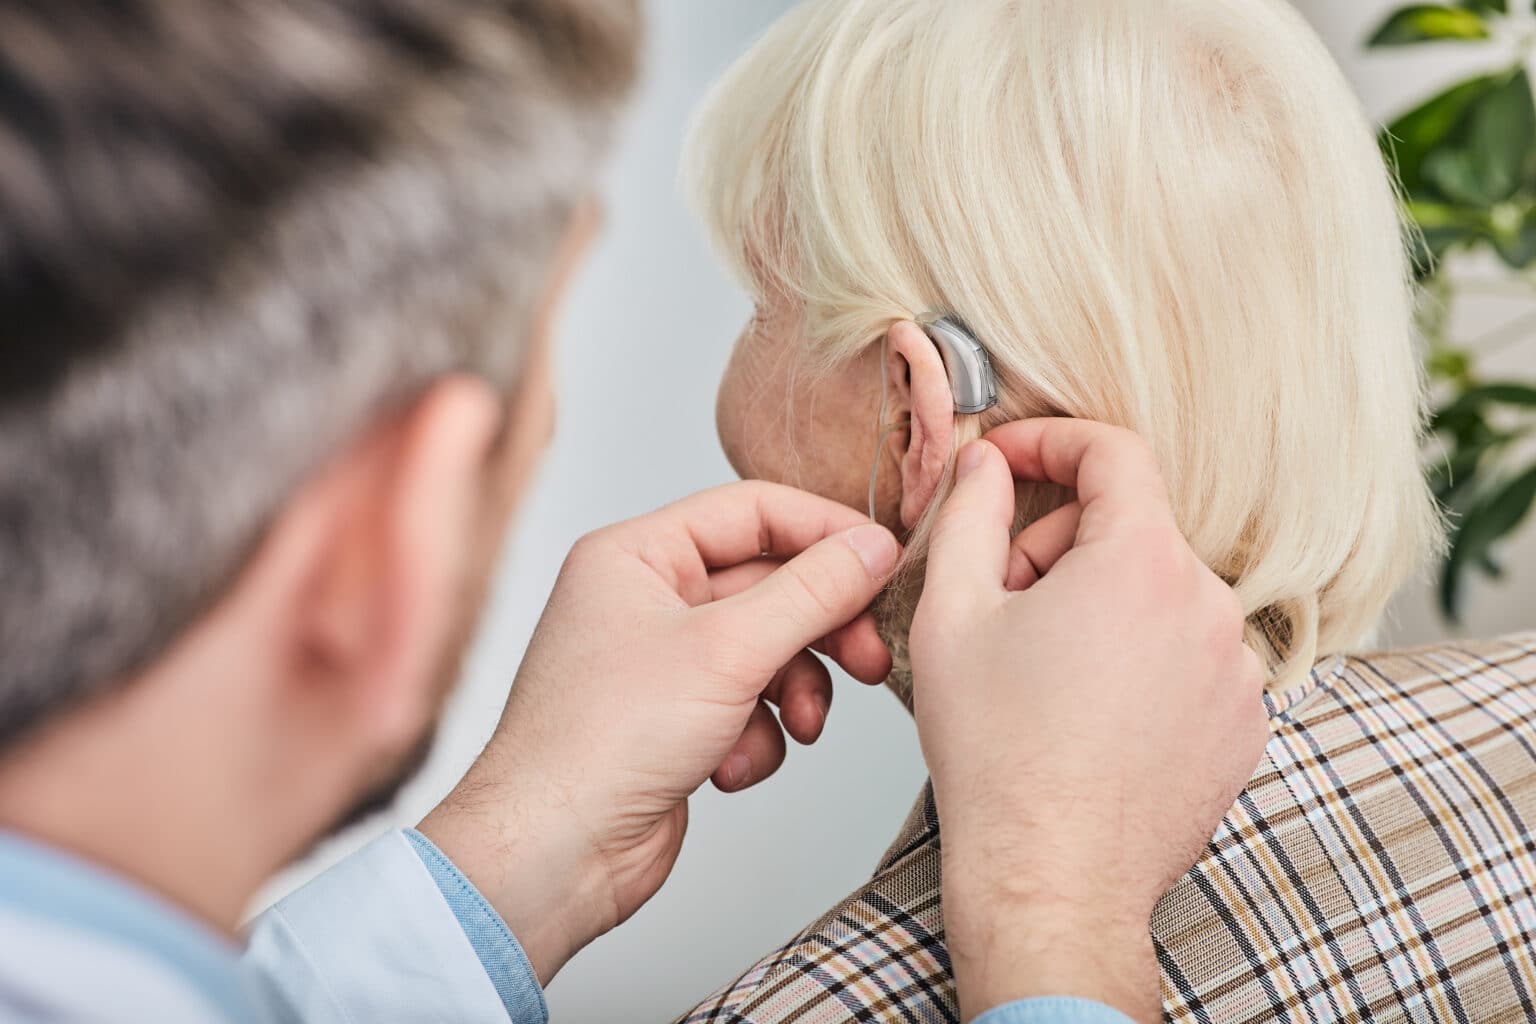 Audiologist fitting a woman with a hearing aid.